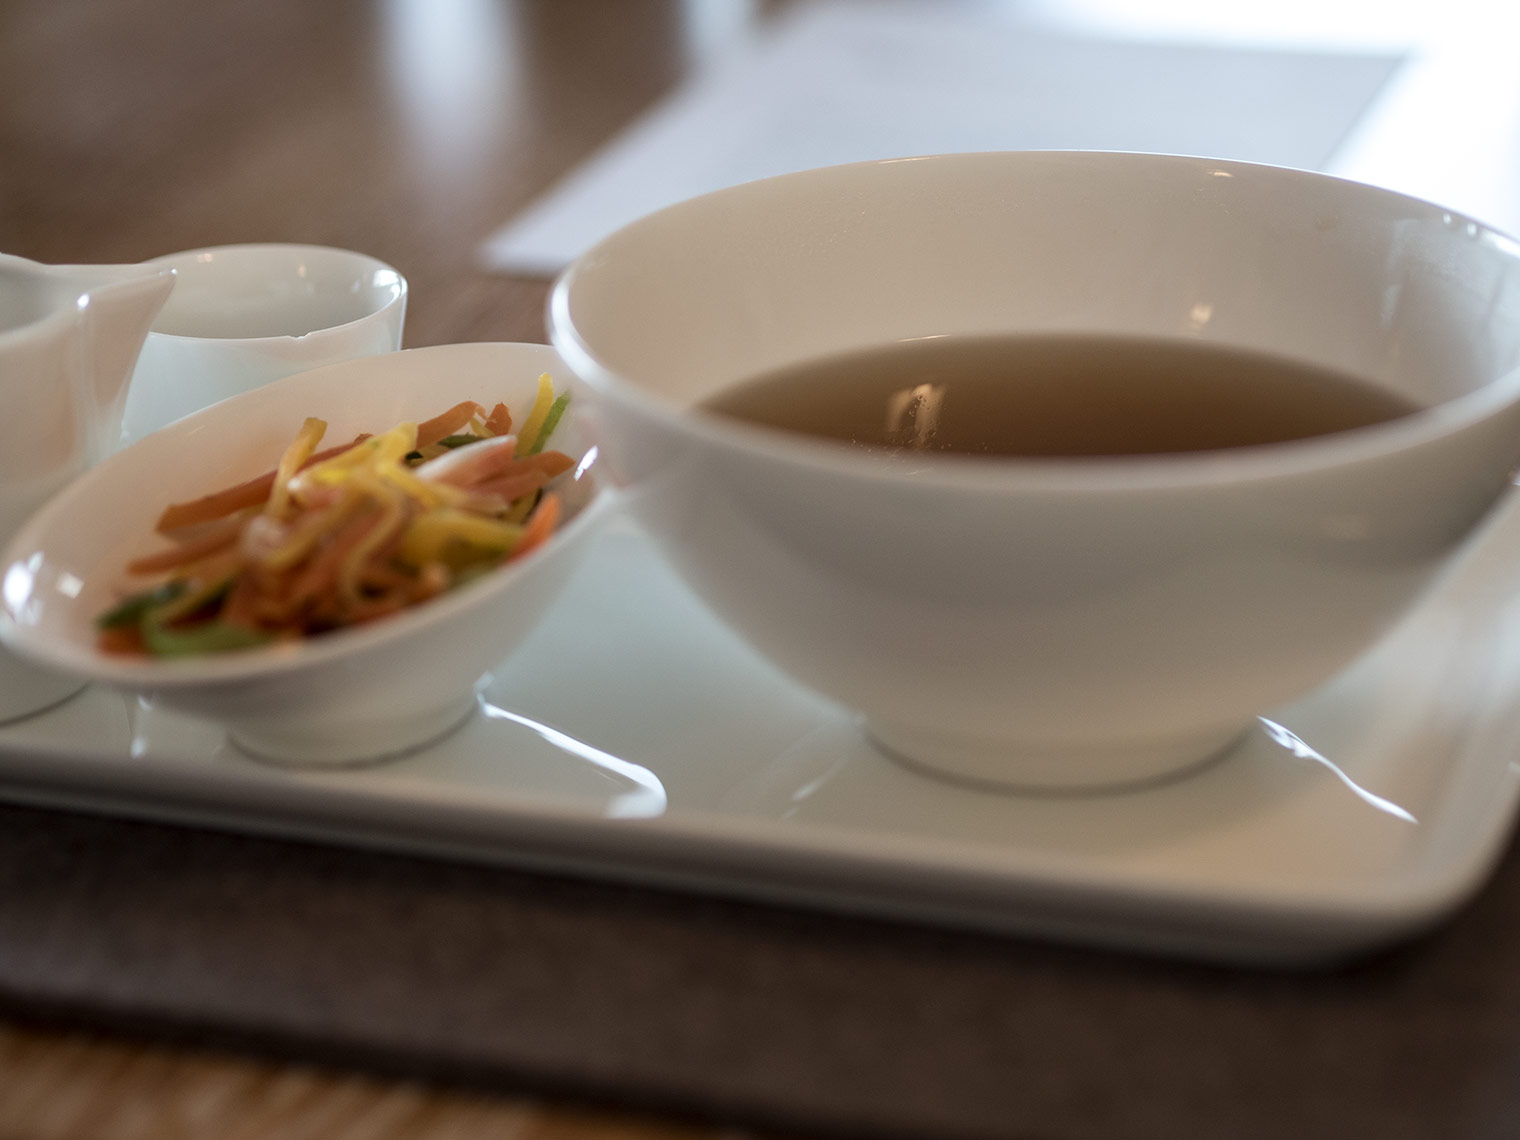 Vegetable broth at FX Mayr clinic in Austria. Review by Chic Journal